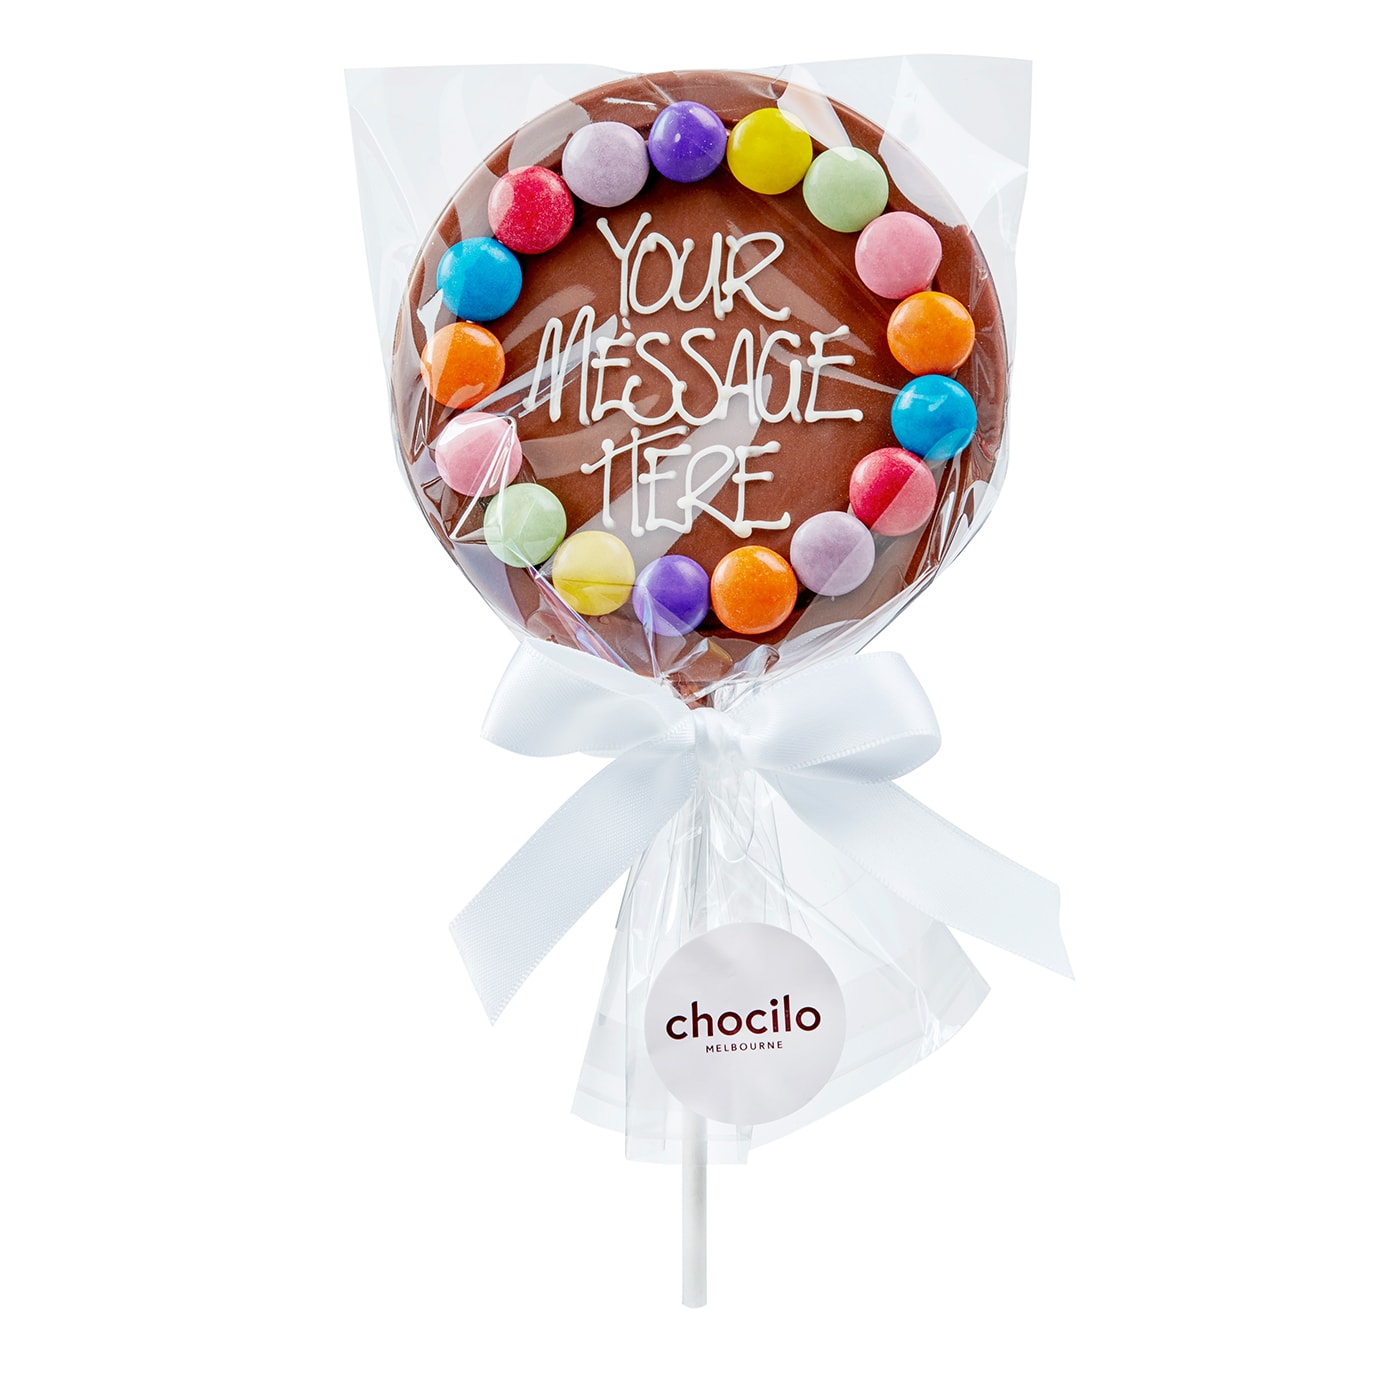 Chocilo Melbourne Personalised Chocolate Lollipop with Smarties